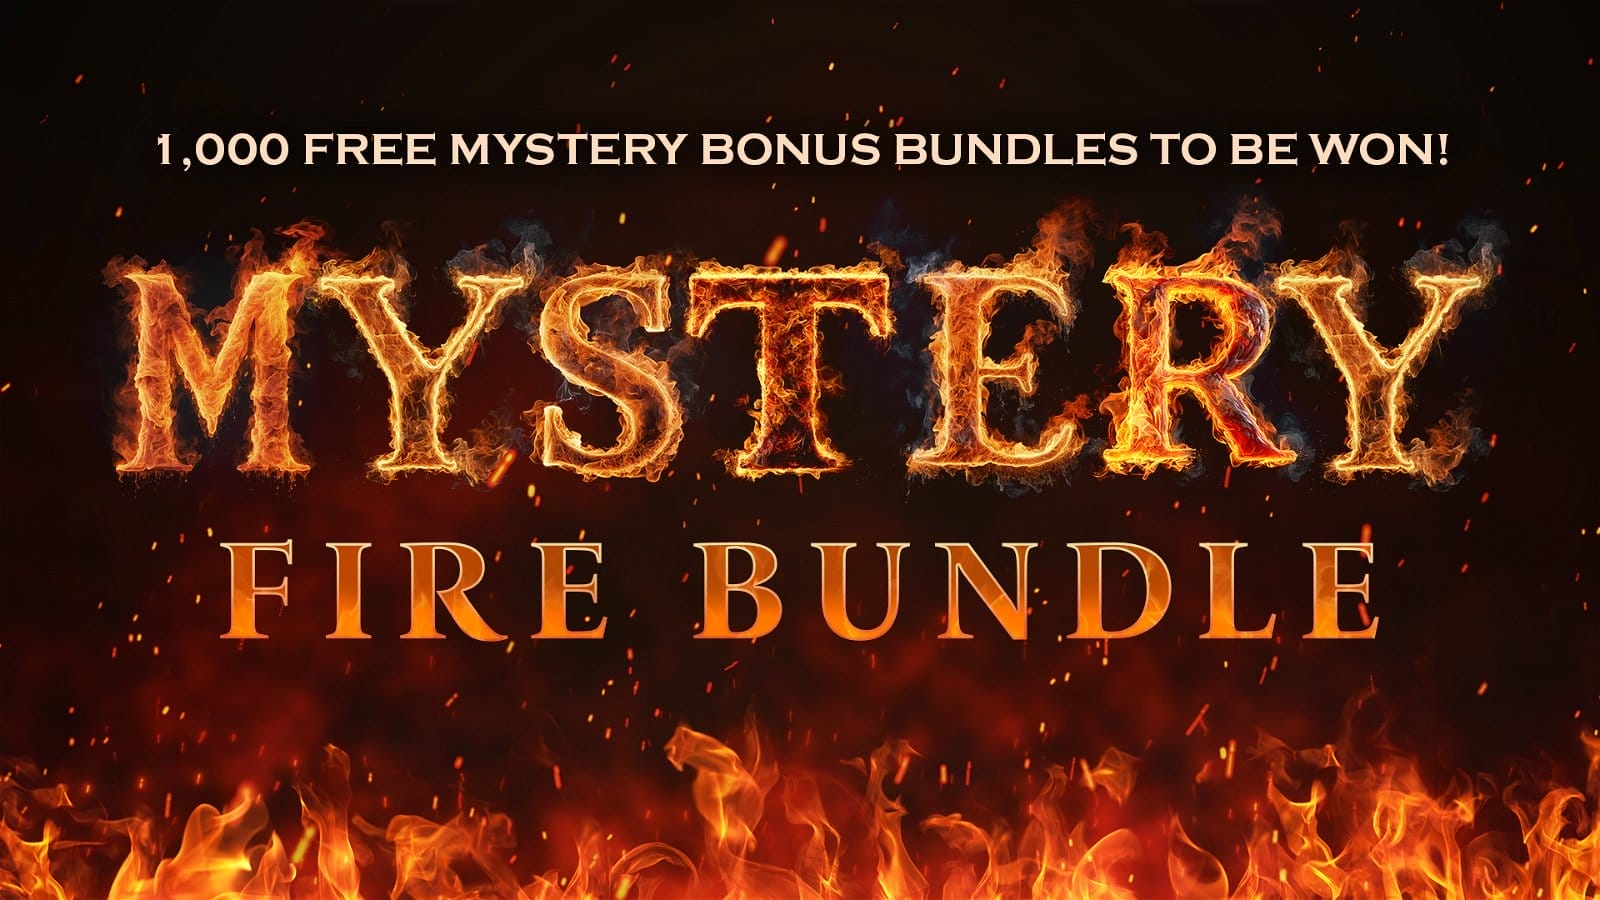 ''Mystery Fire Bundle'' and ''1,000 free mystery bonus bundles to be won!'' are written on a fire-style background, with flames leaping up from the bottom.